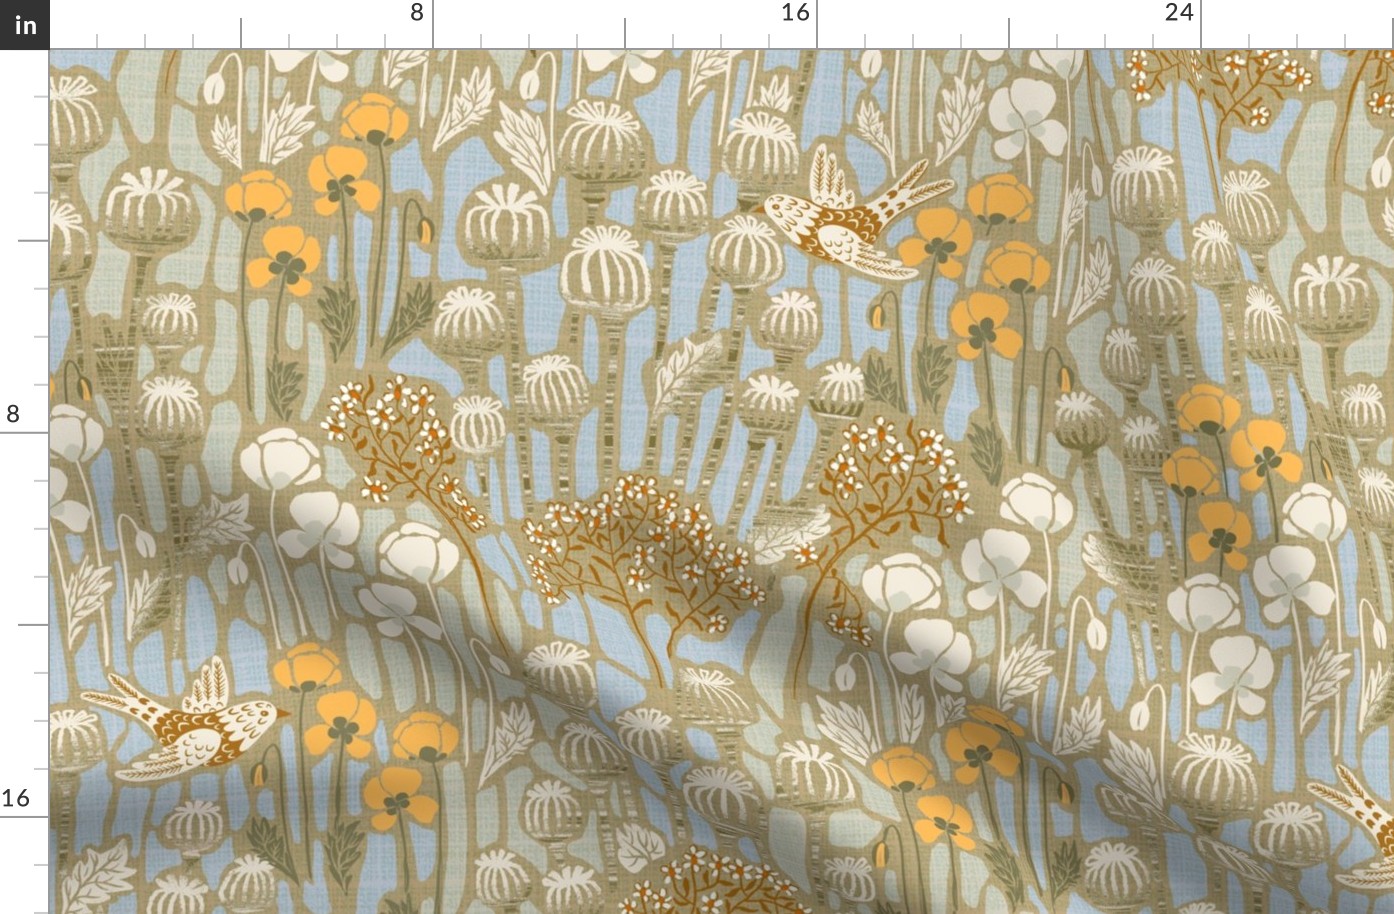 xl - poppy field with birds in neutral colors - extra large as fabric 24" and as wallpaper